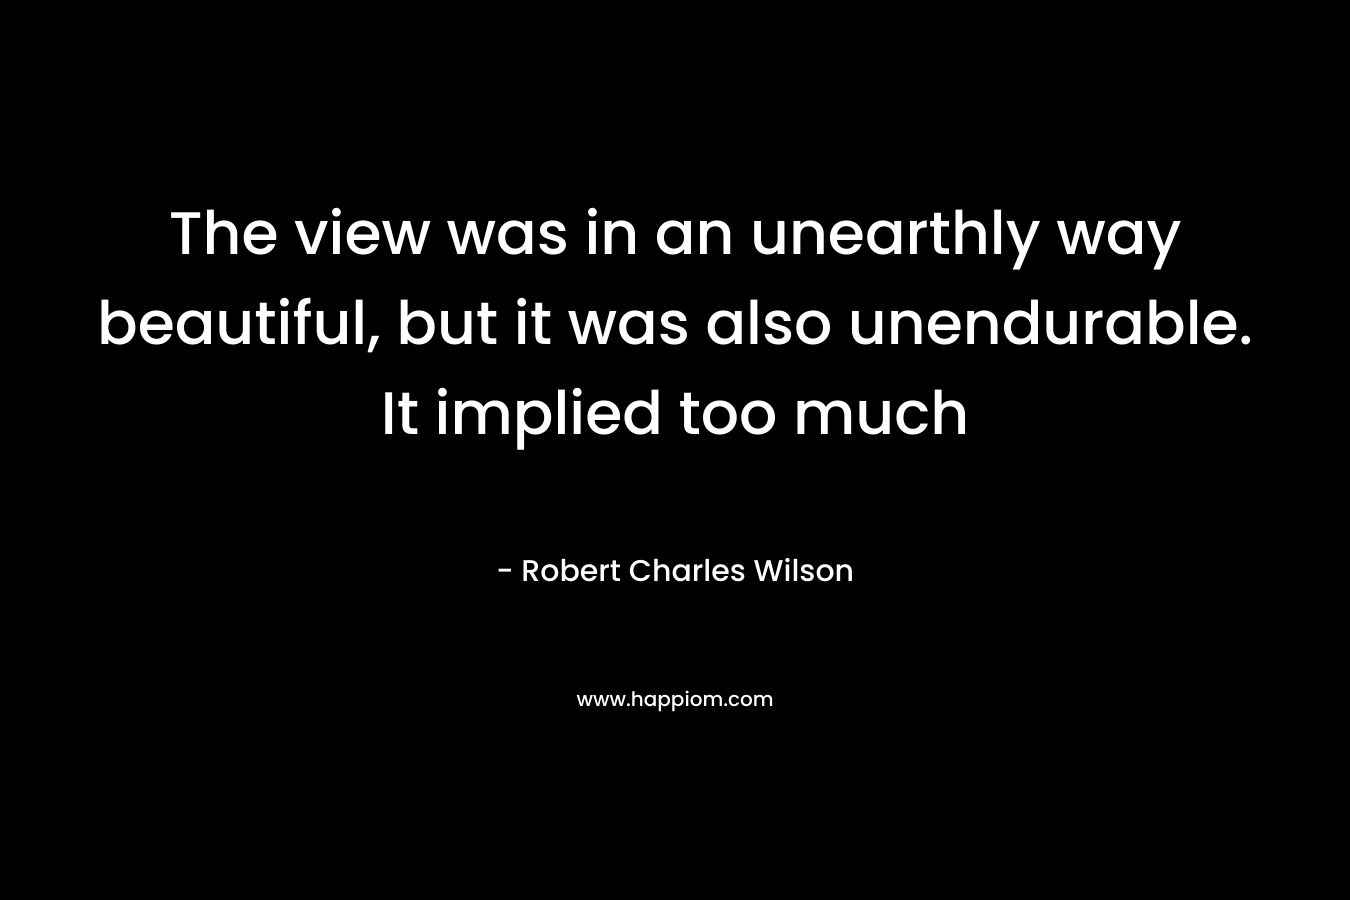 The view was in an unearthly way beautiful, but it was also unendurable. It implied too much – Robert Charles Wilson